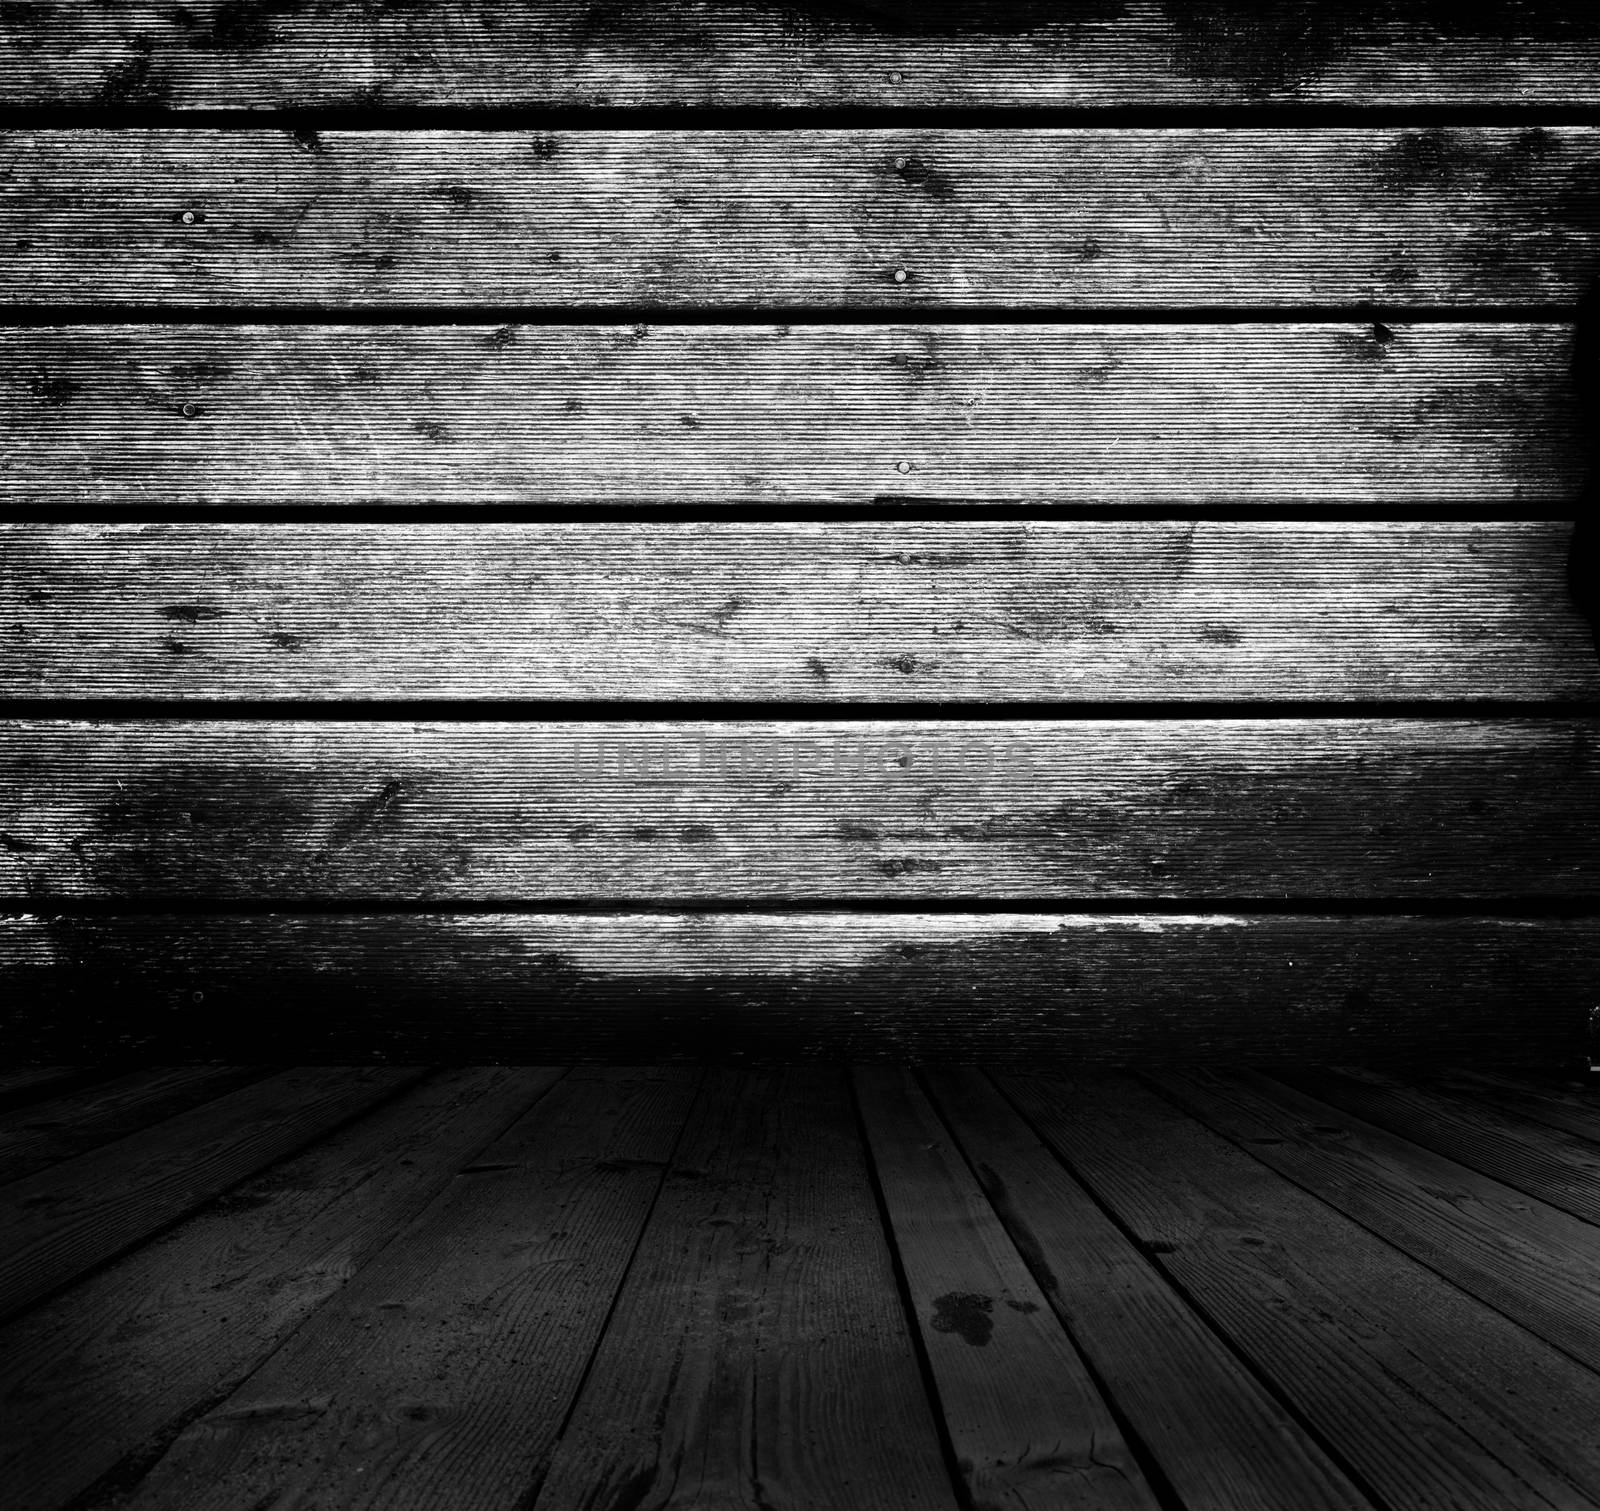 Grunge rustic real wood planks, floor and wall. Perfect for background, texture, high quality